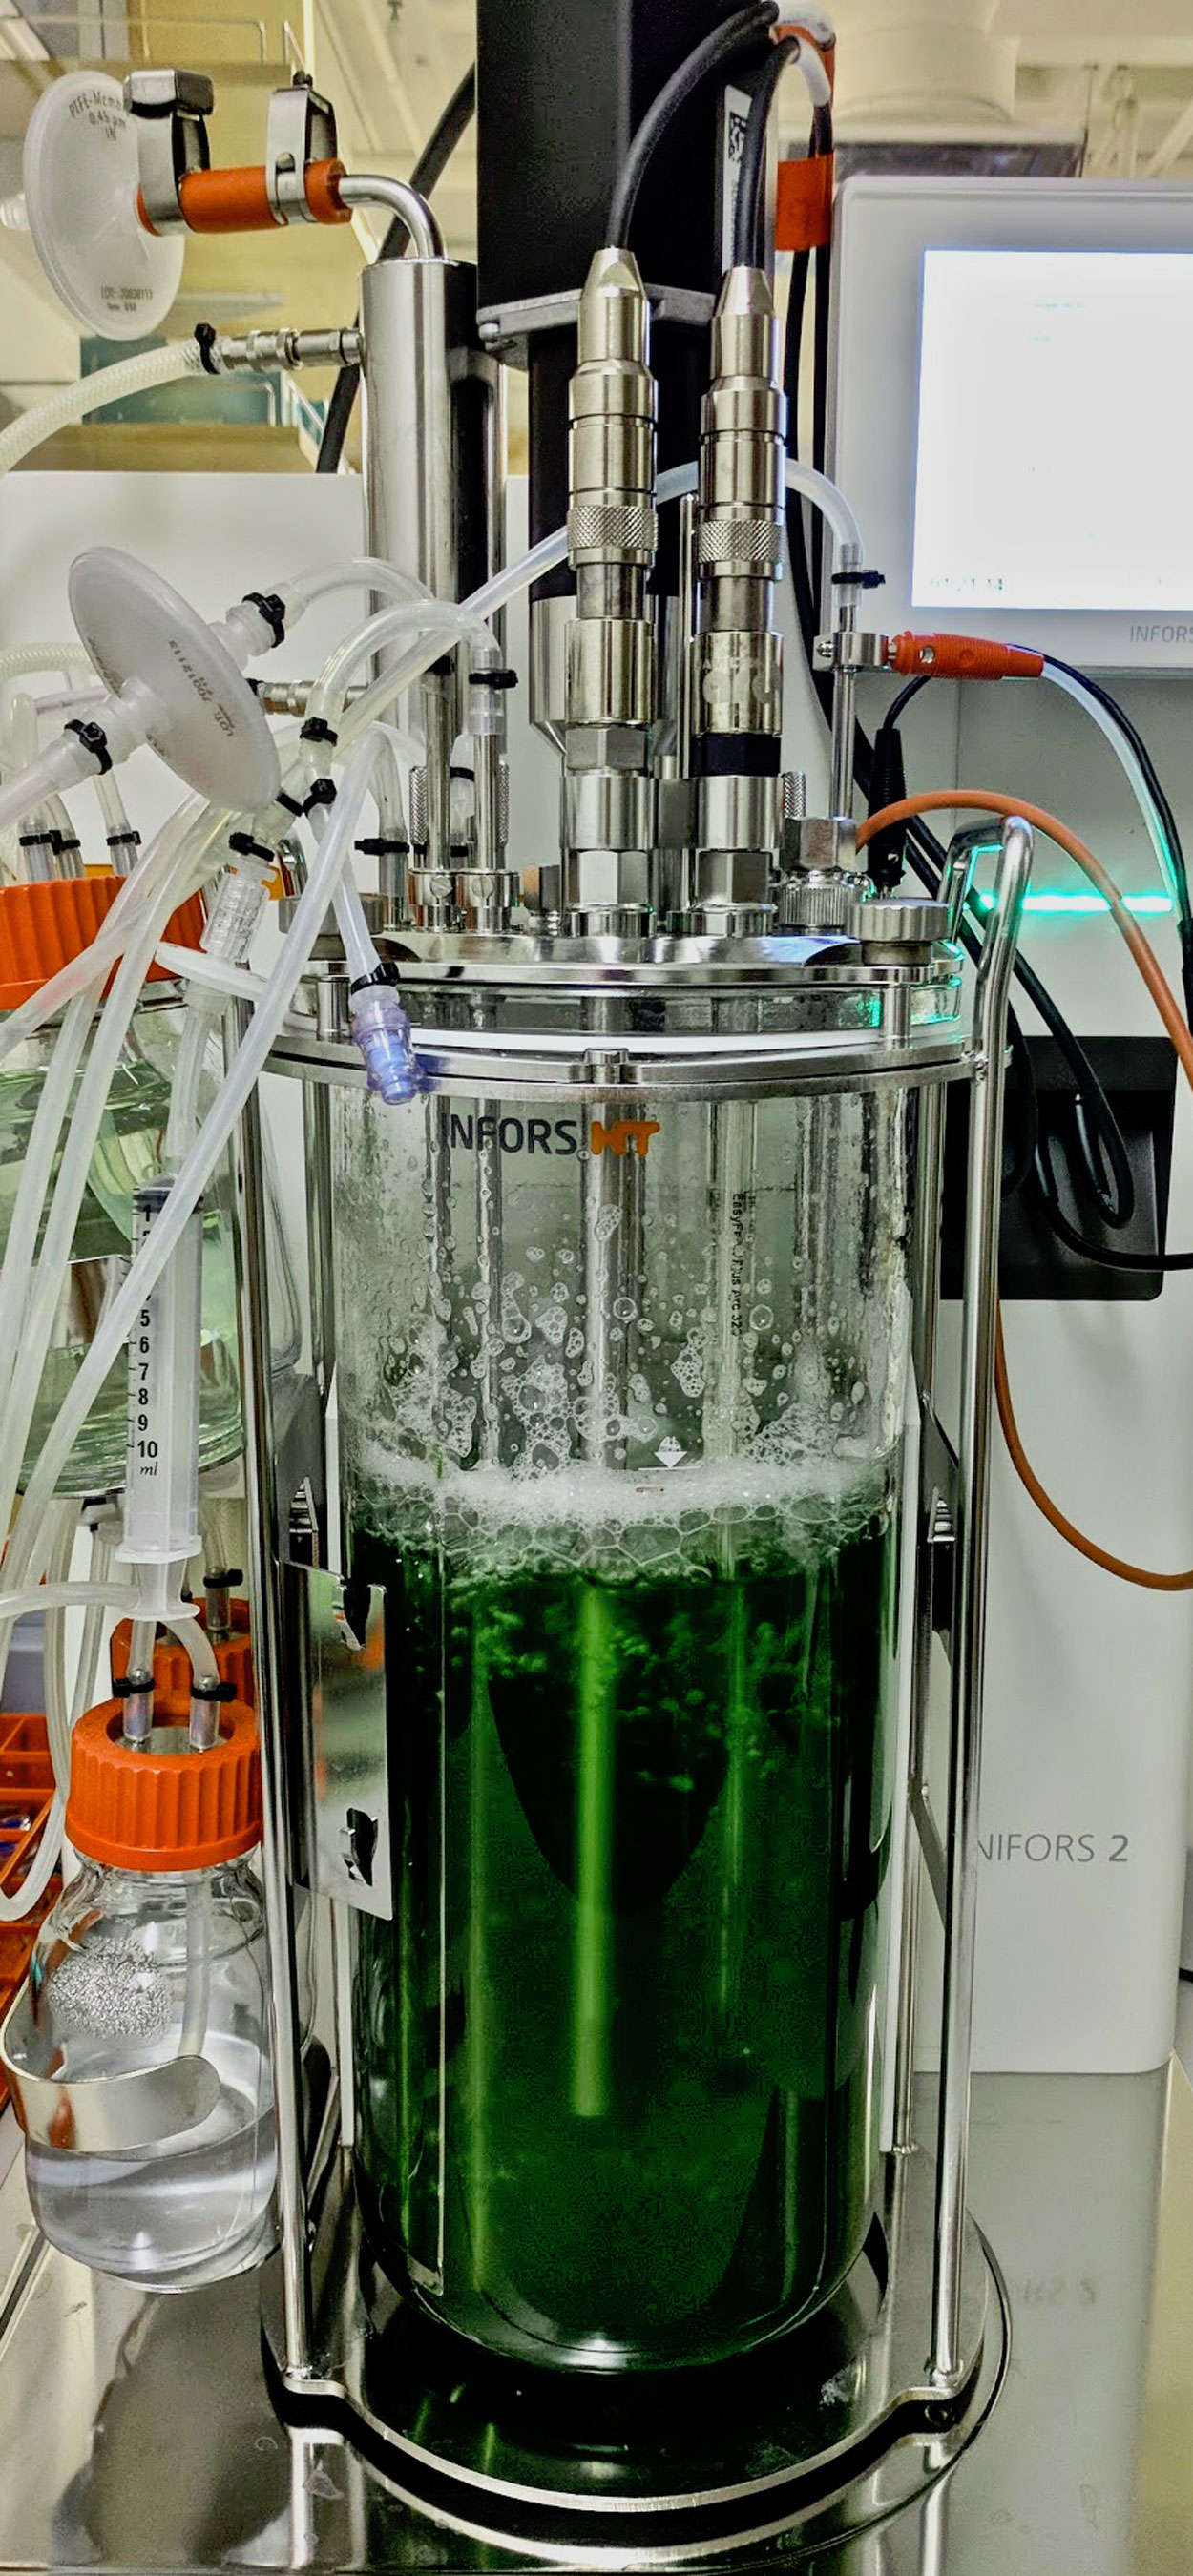 A large glass clyndrical tube with tubes coming out of the top. Inside the tube is liquid, clear green algae.